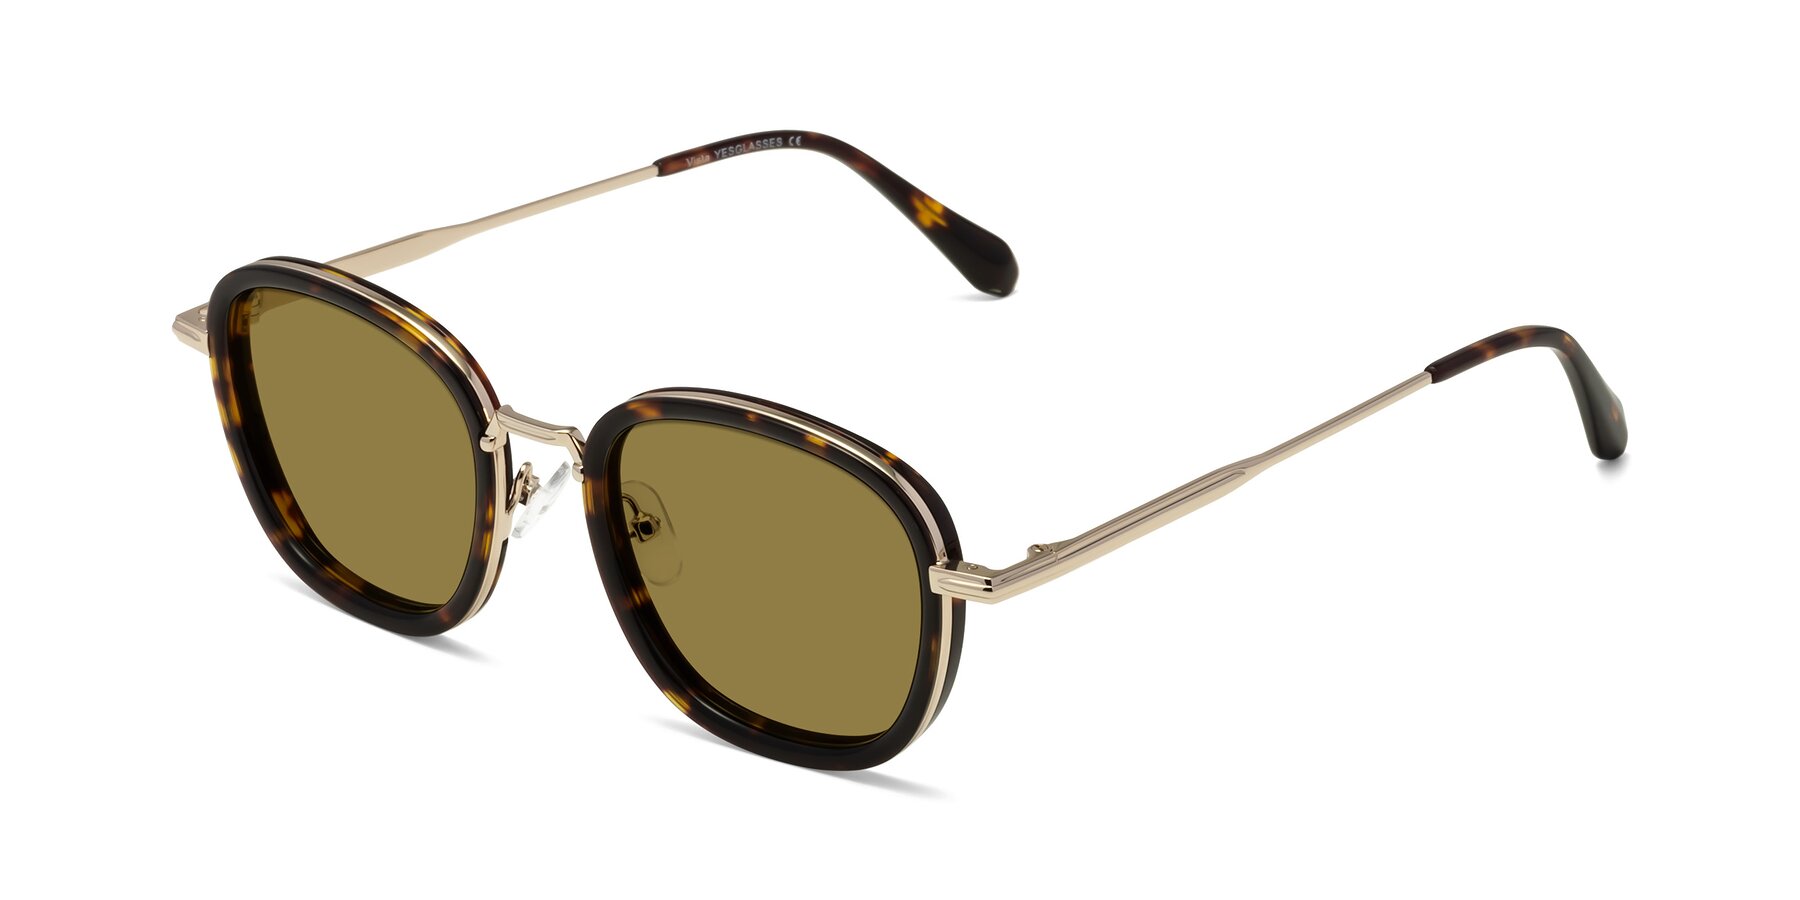 Angle of Vista in Tortoise-Light Gold with Brown Polarized Lenses